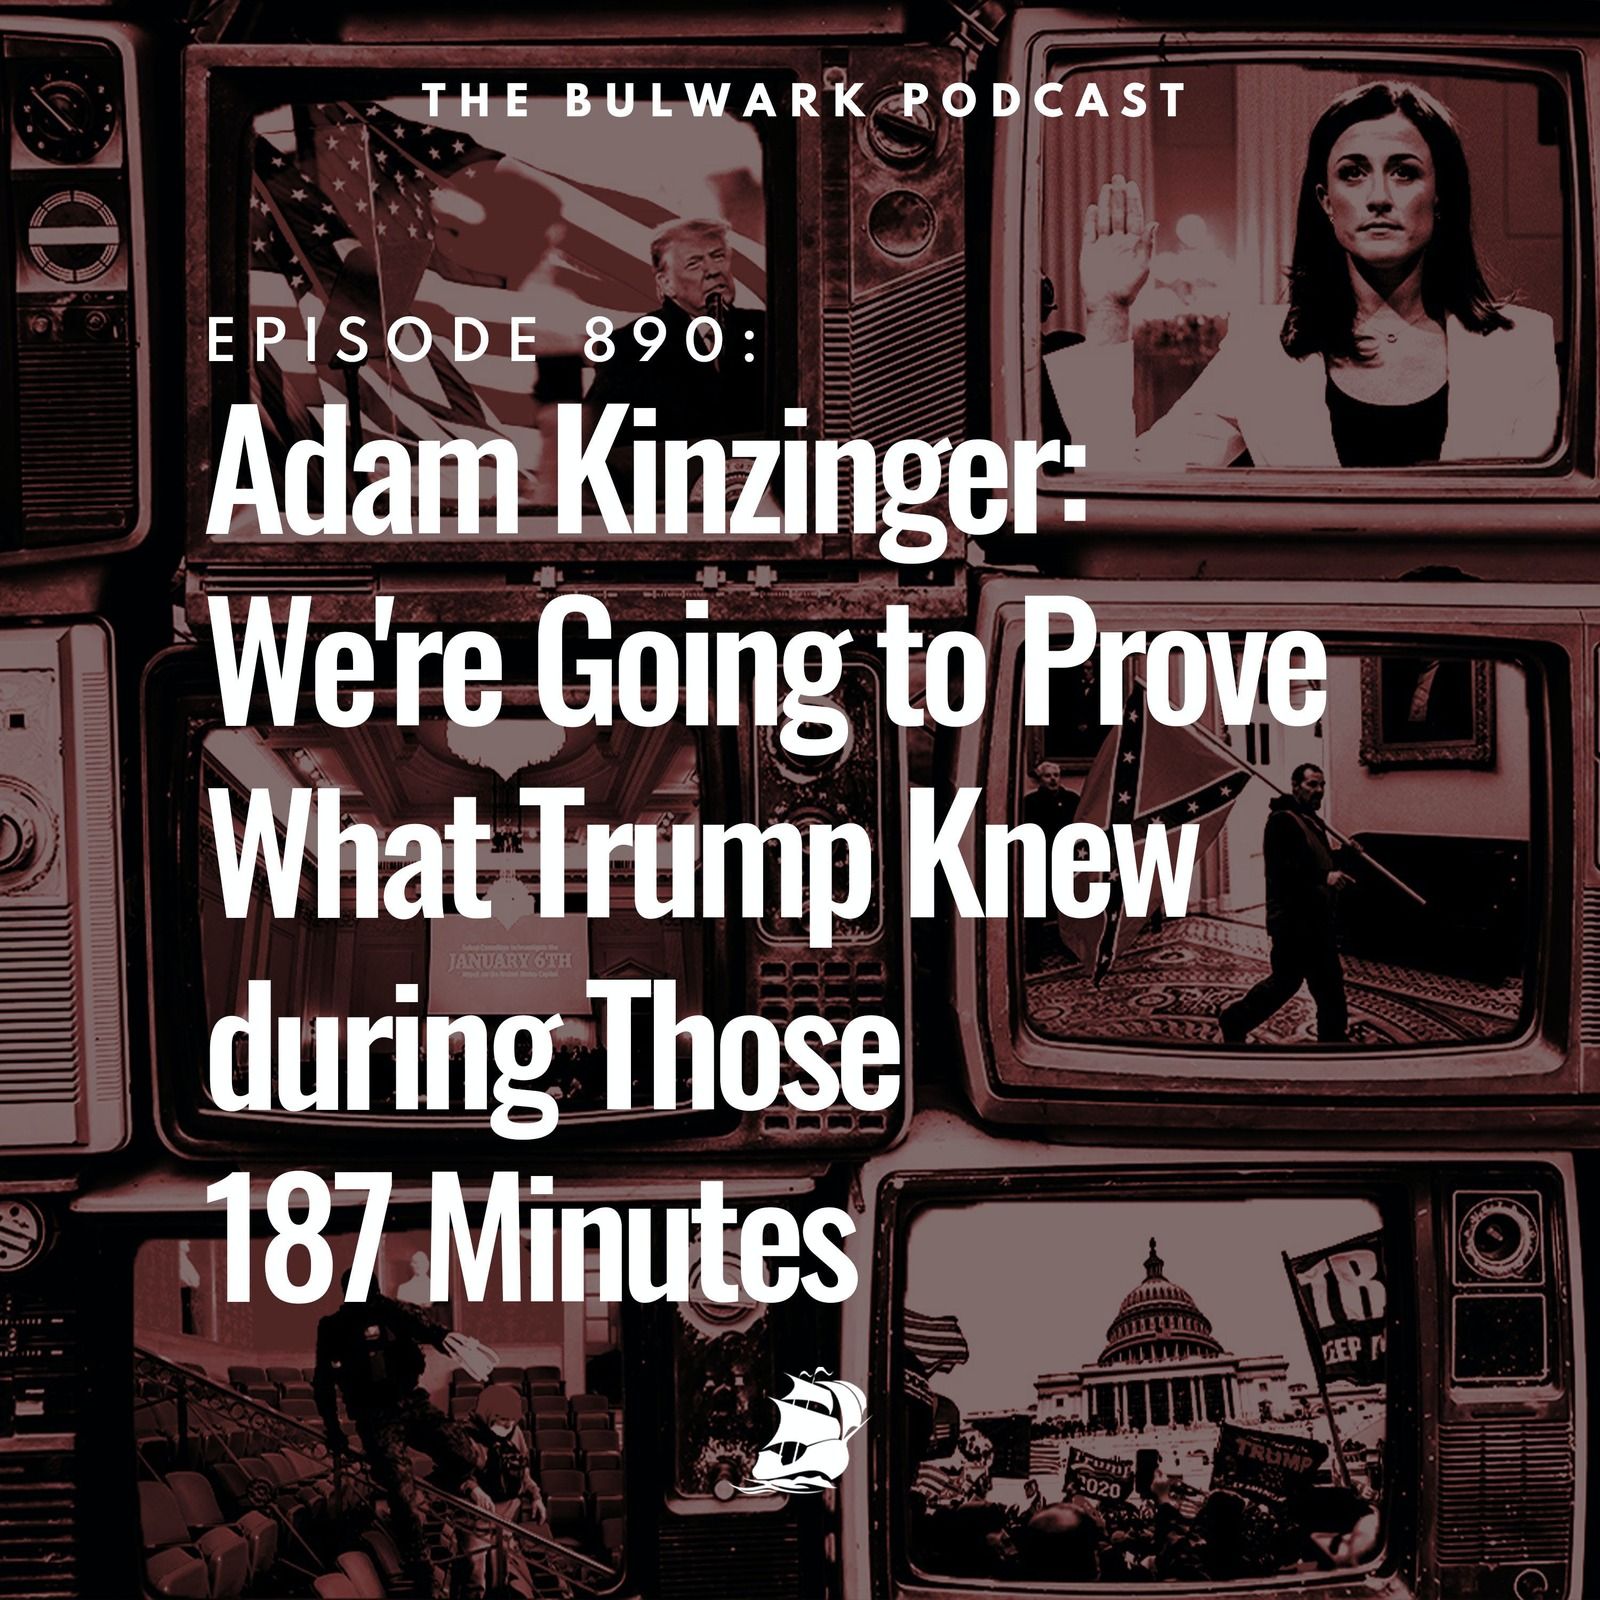 Adam Kinzinger: We're Going to Prove What Trump Knew during Those 187 Minutes